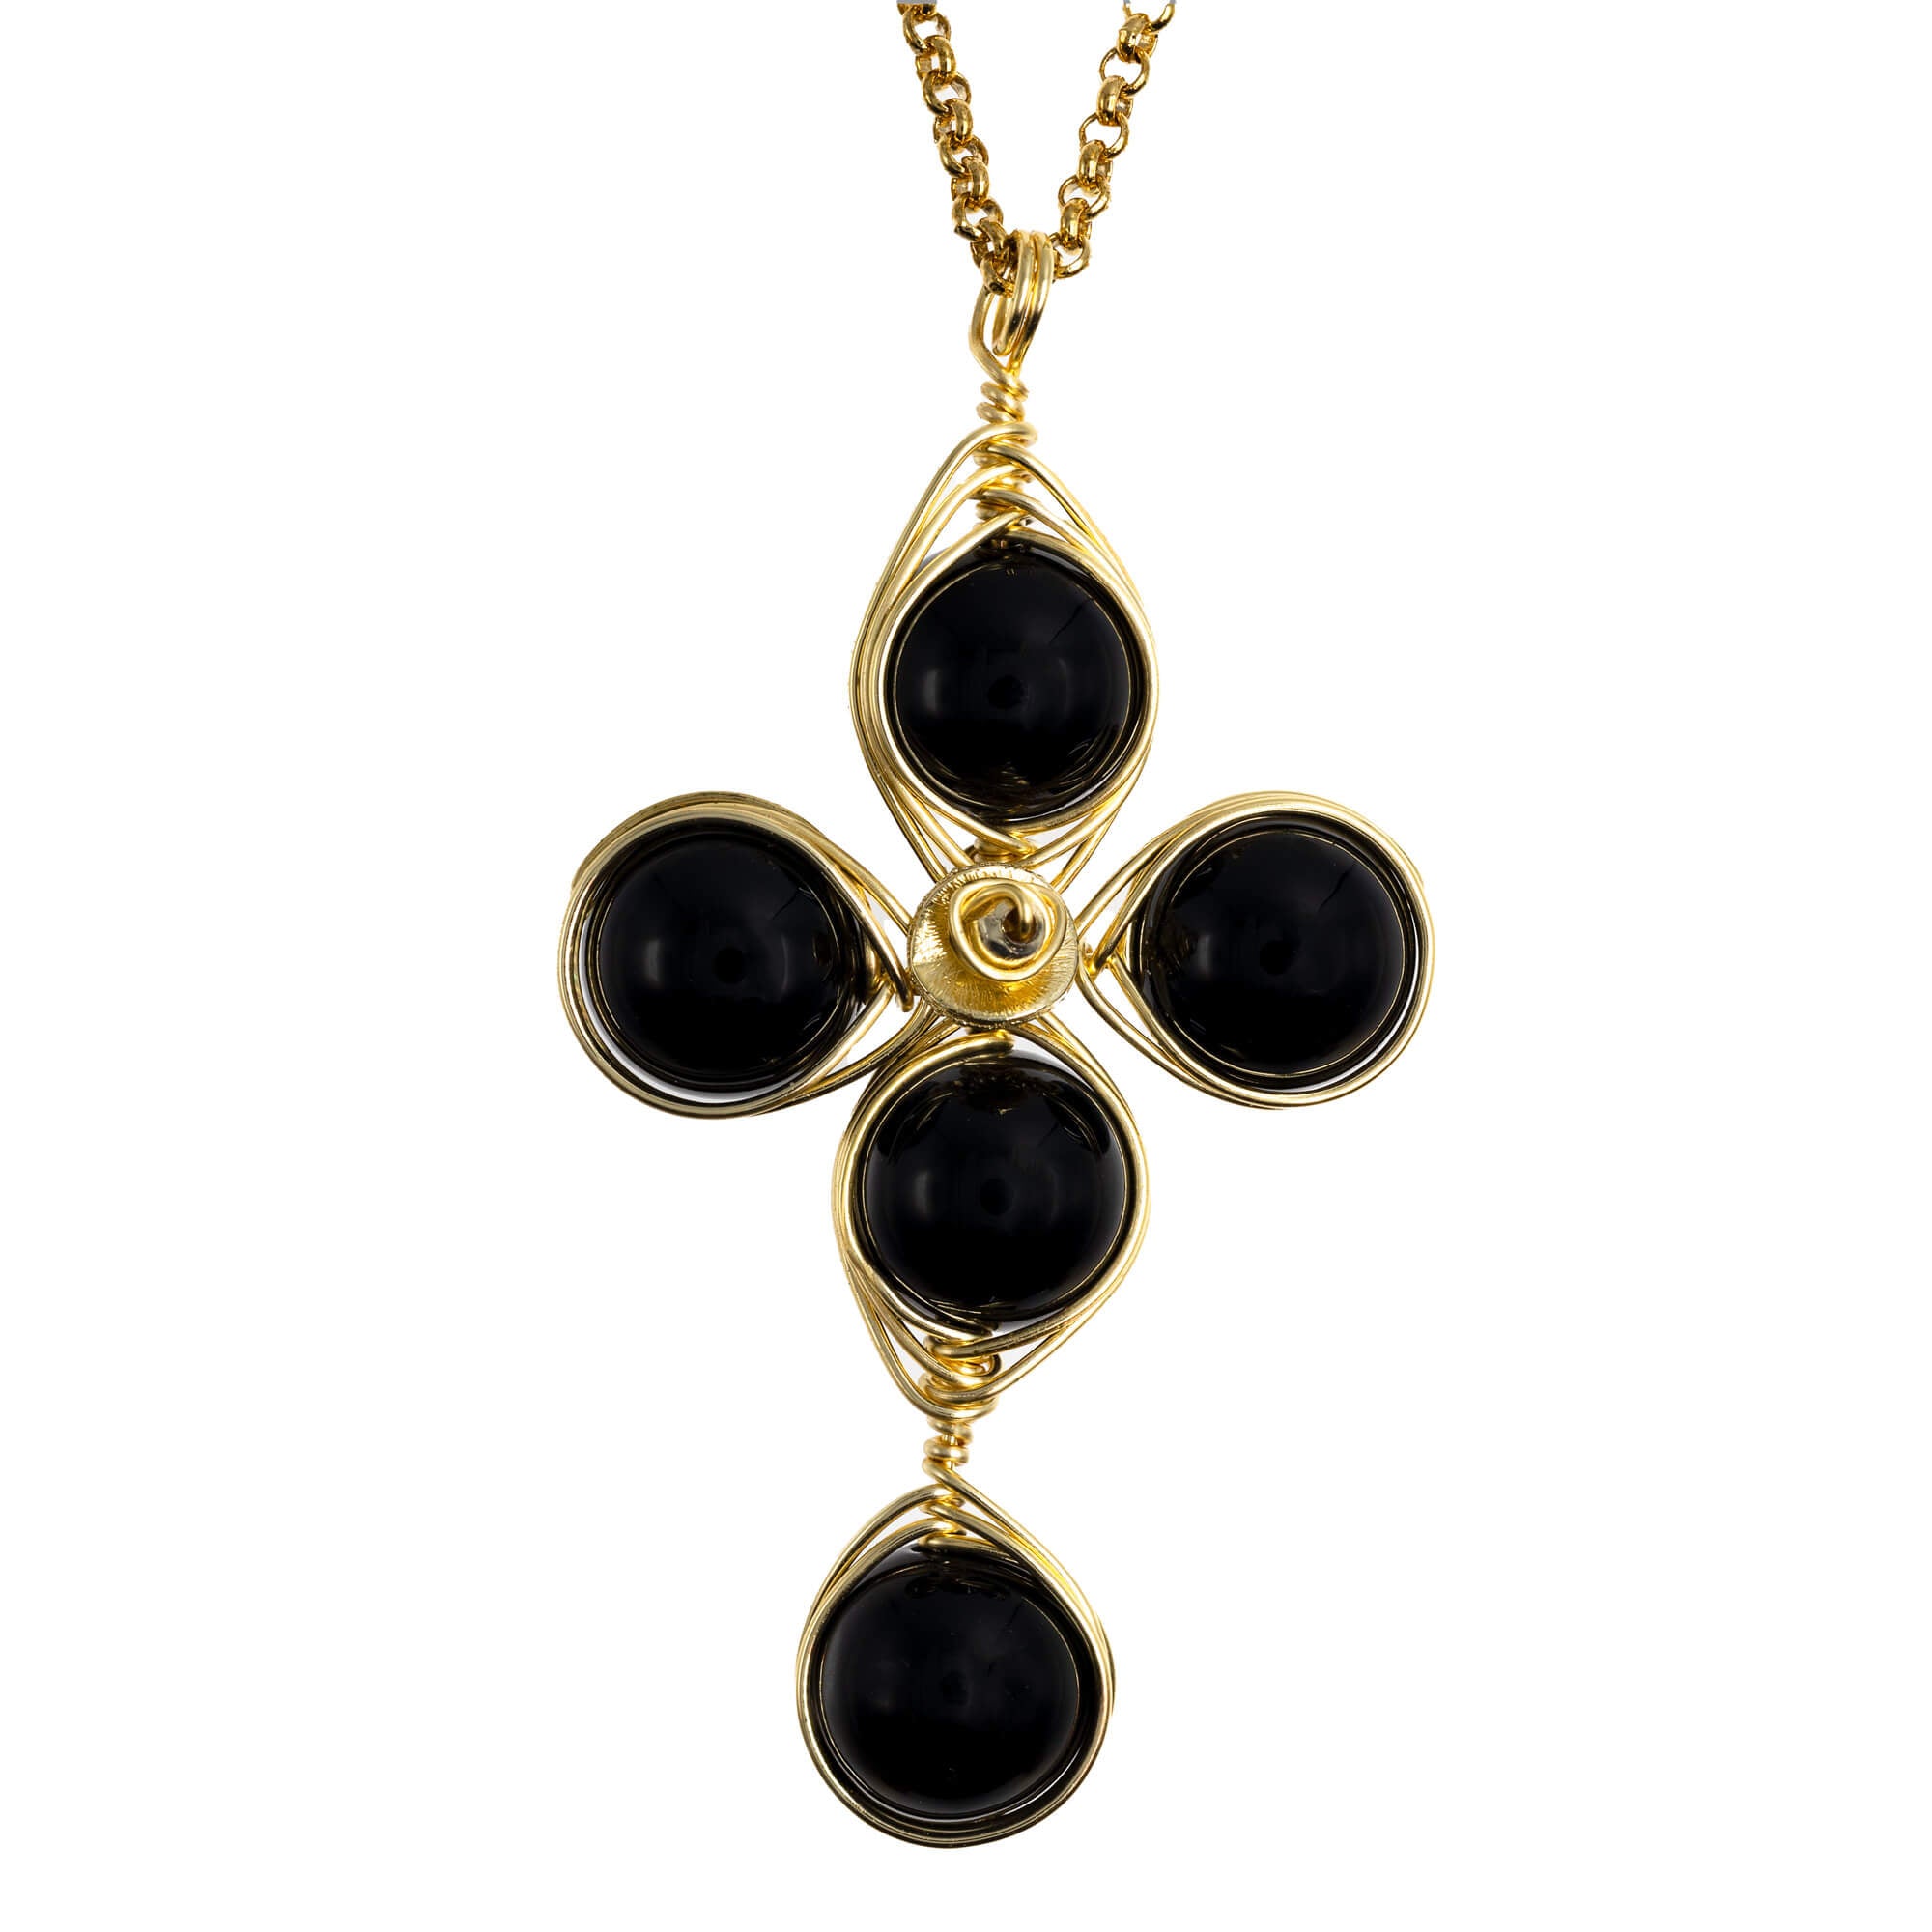 Self confidence Cross Pendant Necklace is 2.5 inches long on a 16 inches 22K gold plated chain. Handmade with Non-tarnish gold plated wire and Polished Black Onyx Beads. Gold and black minimalist Wired Wrapped Cross.